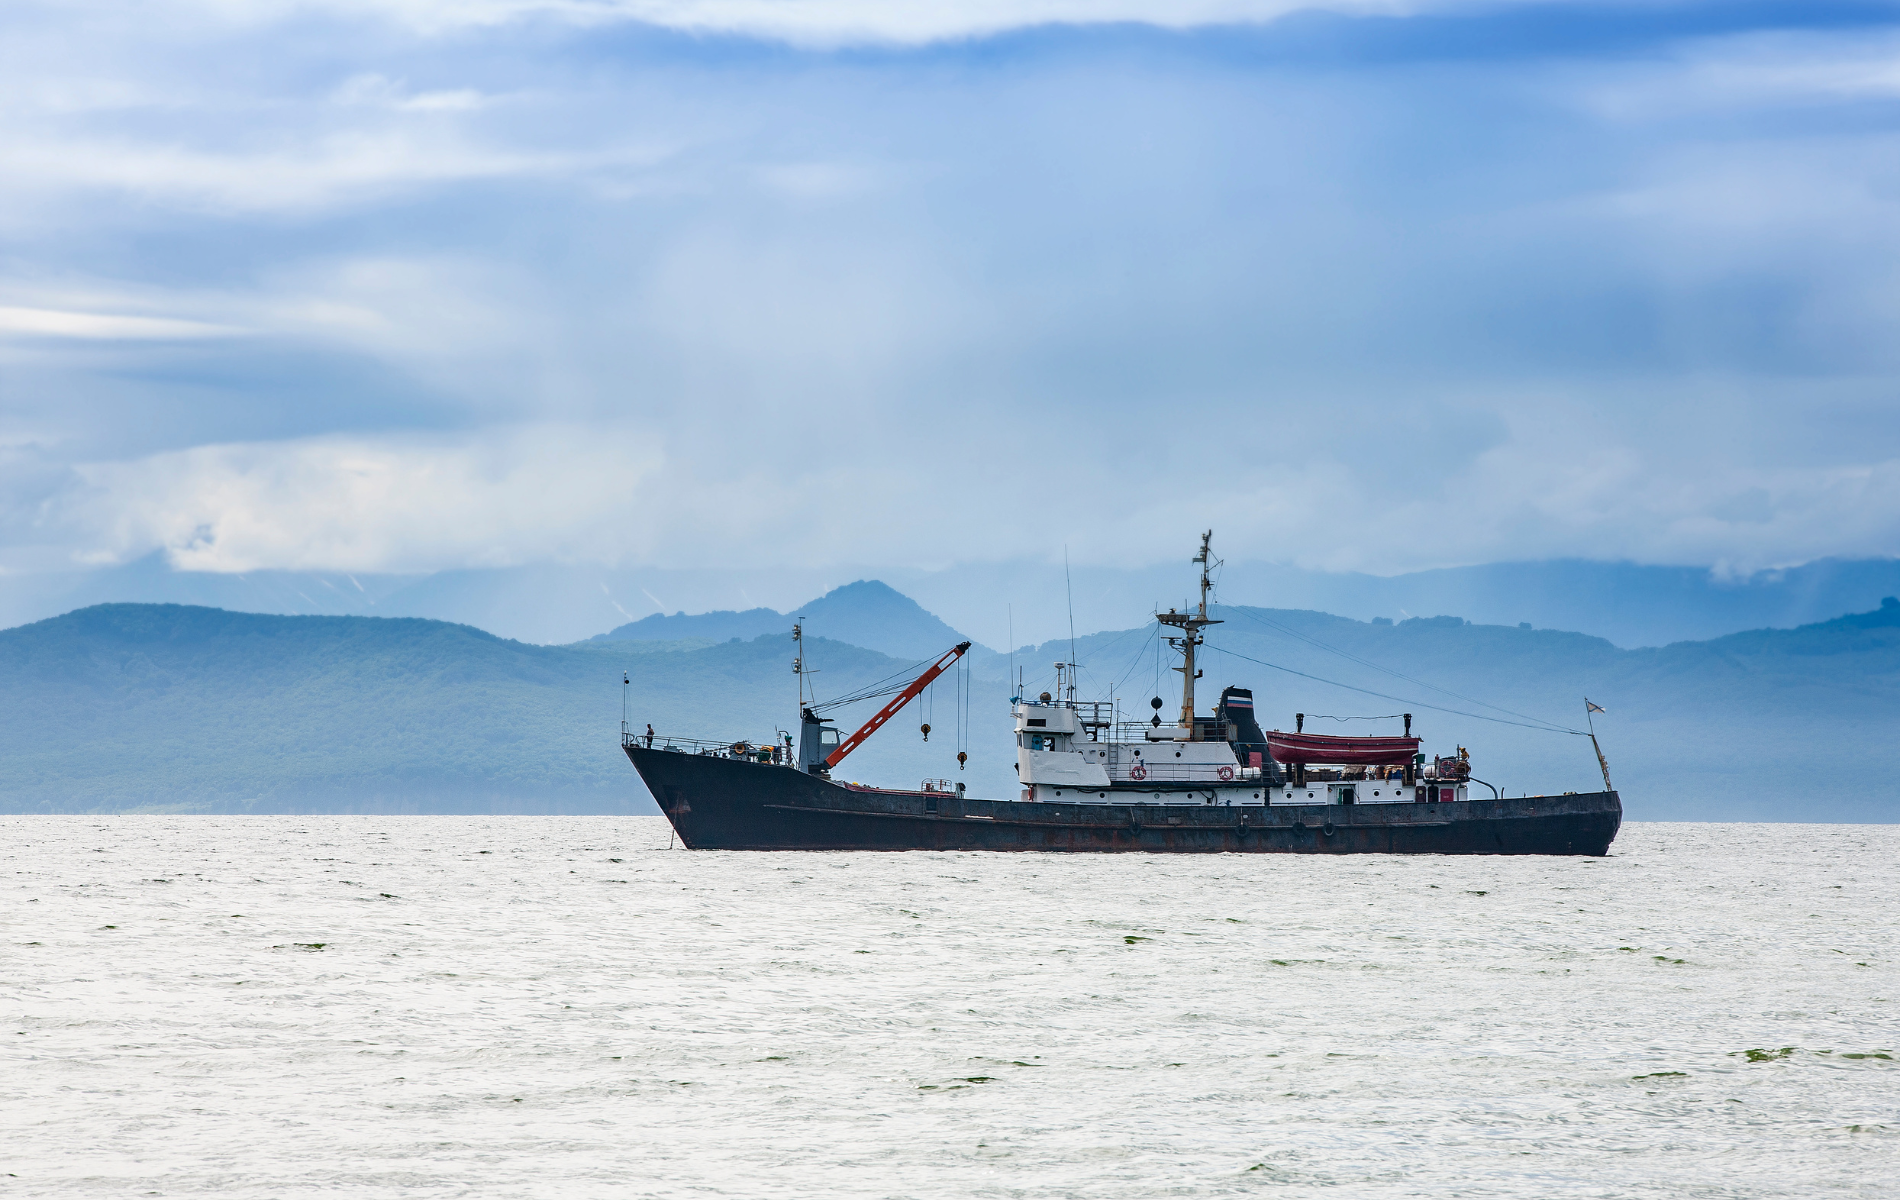 Fishing Vessel on Water with Mountainous Background